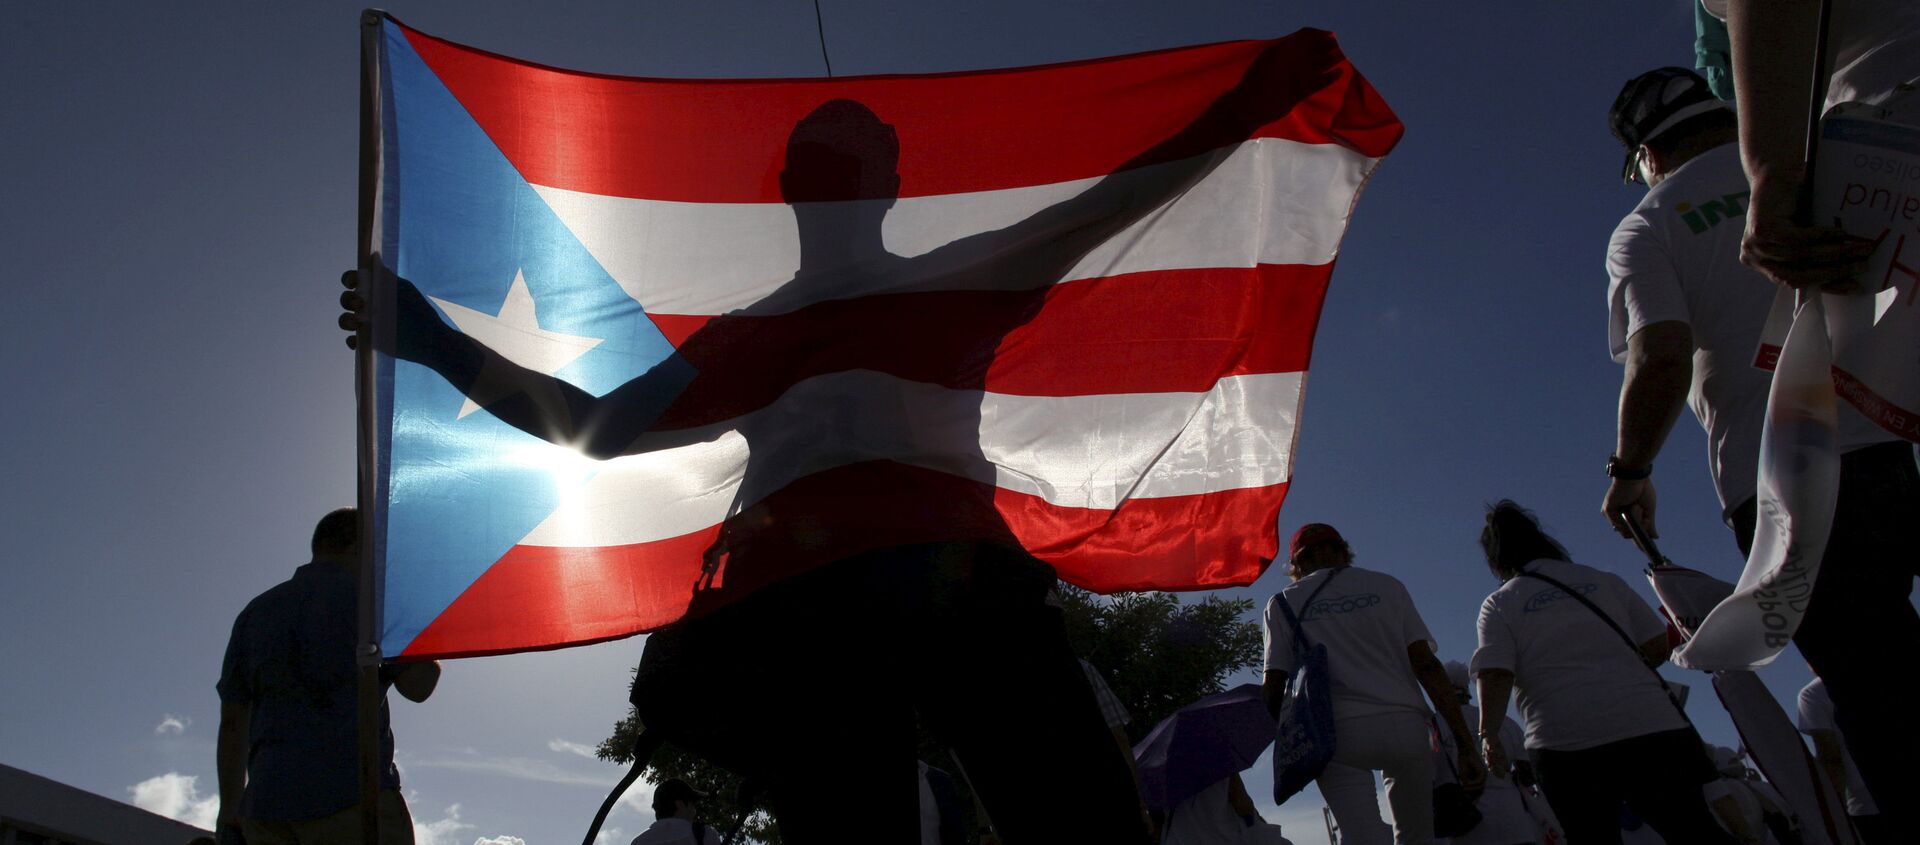 A protester holding a Puerto Rico's flag takes part in a march to improve healthcare benefits in San Juan - Sputnik Mundo, 1920, 04.11.2020